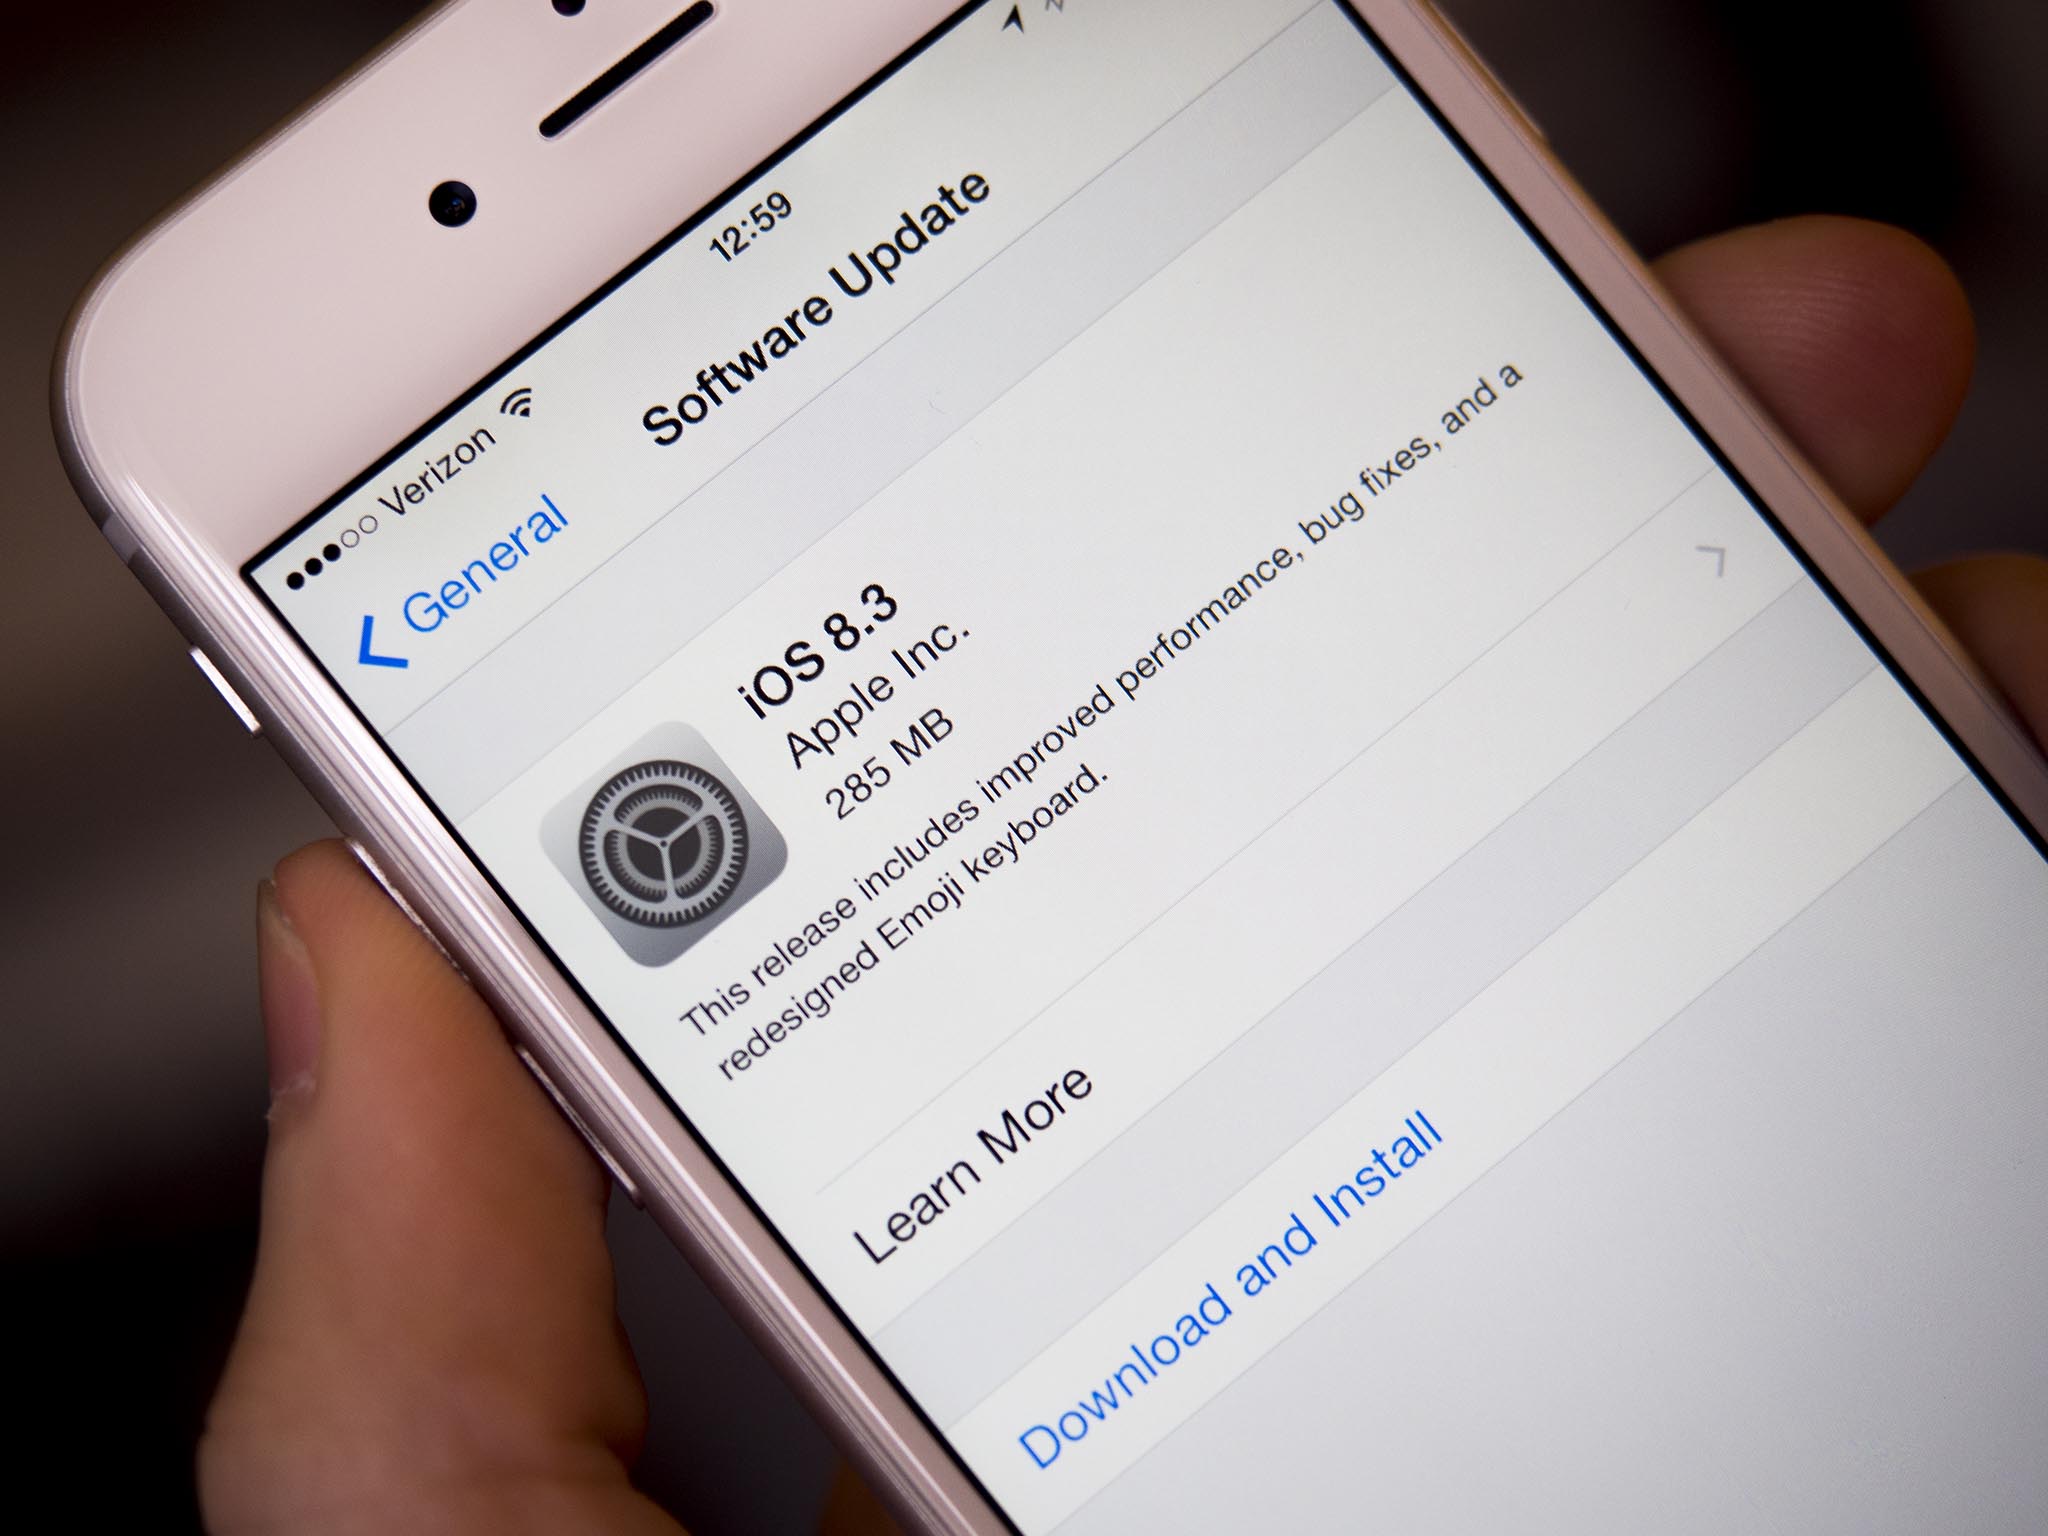 Apple releases iOS 8.3 to the public with performance improvements, new emoji, and more